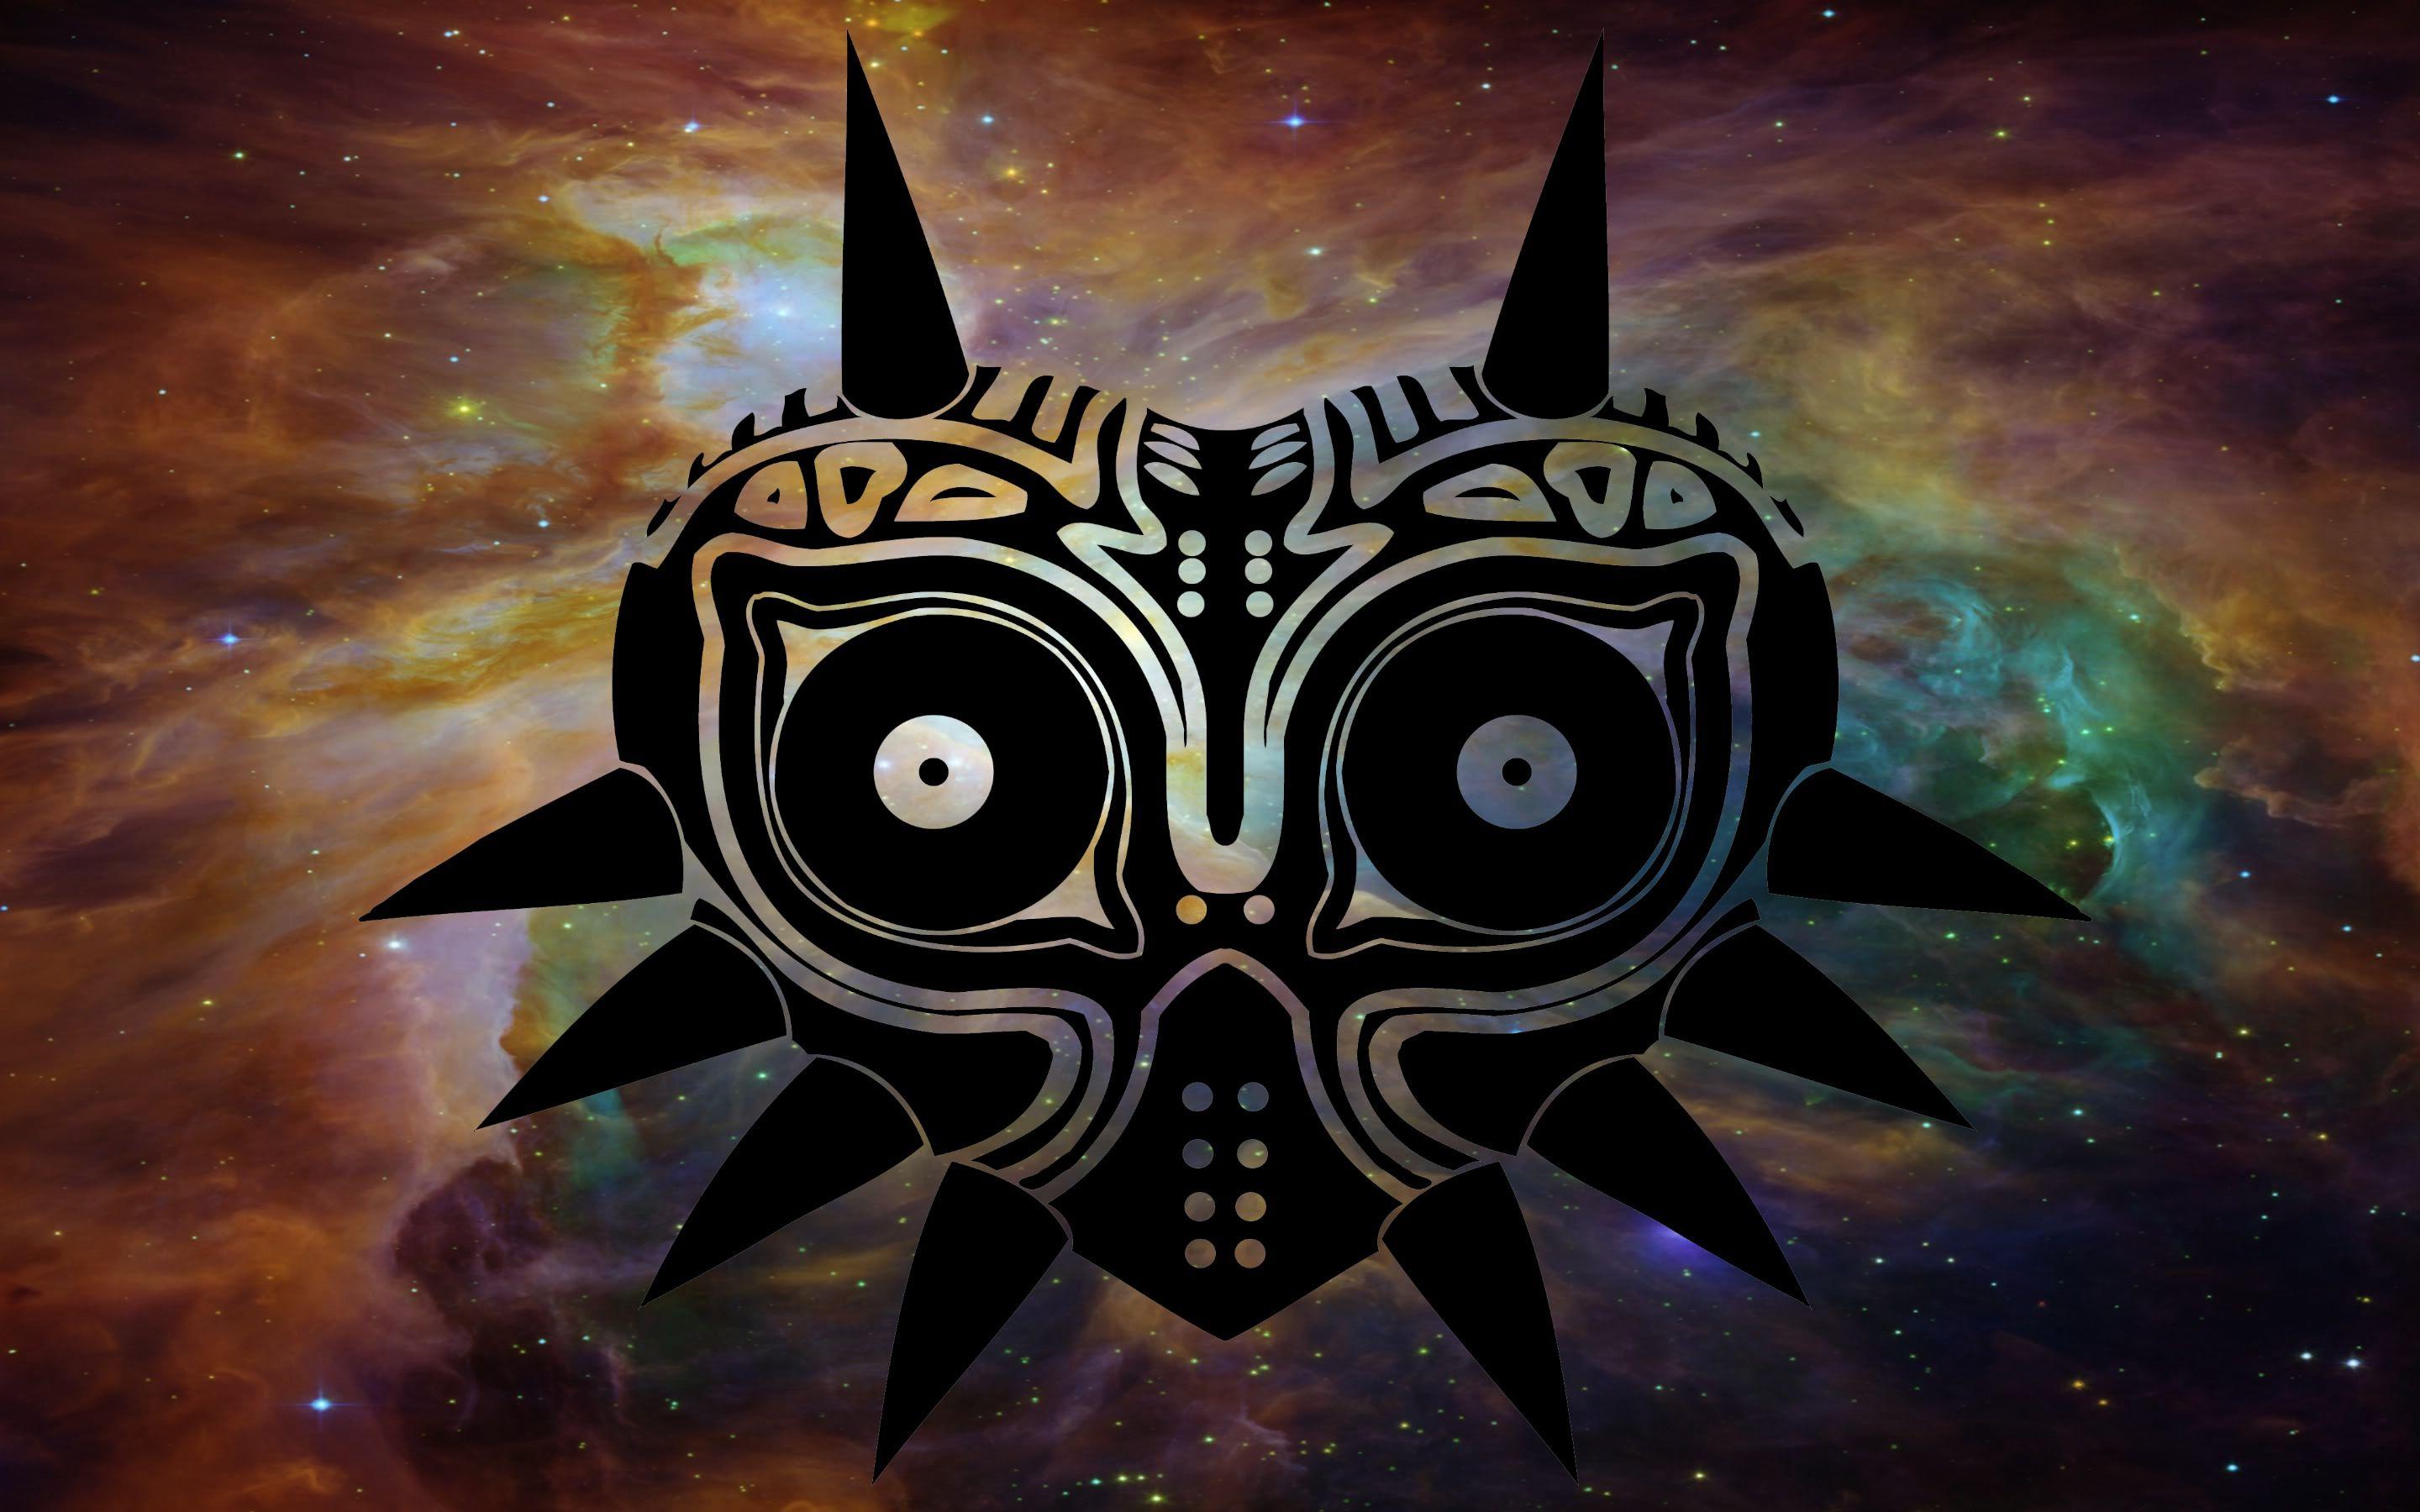 Here is a cool Majora's Mask wallpaper I made